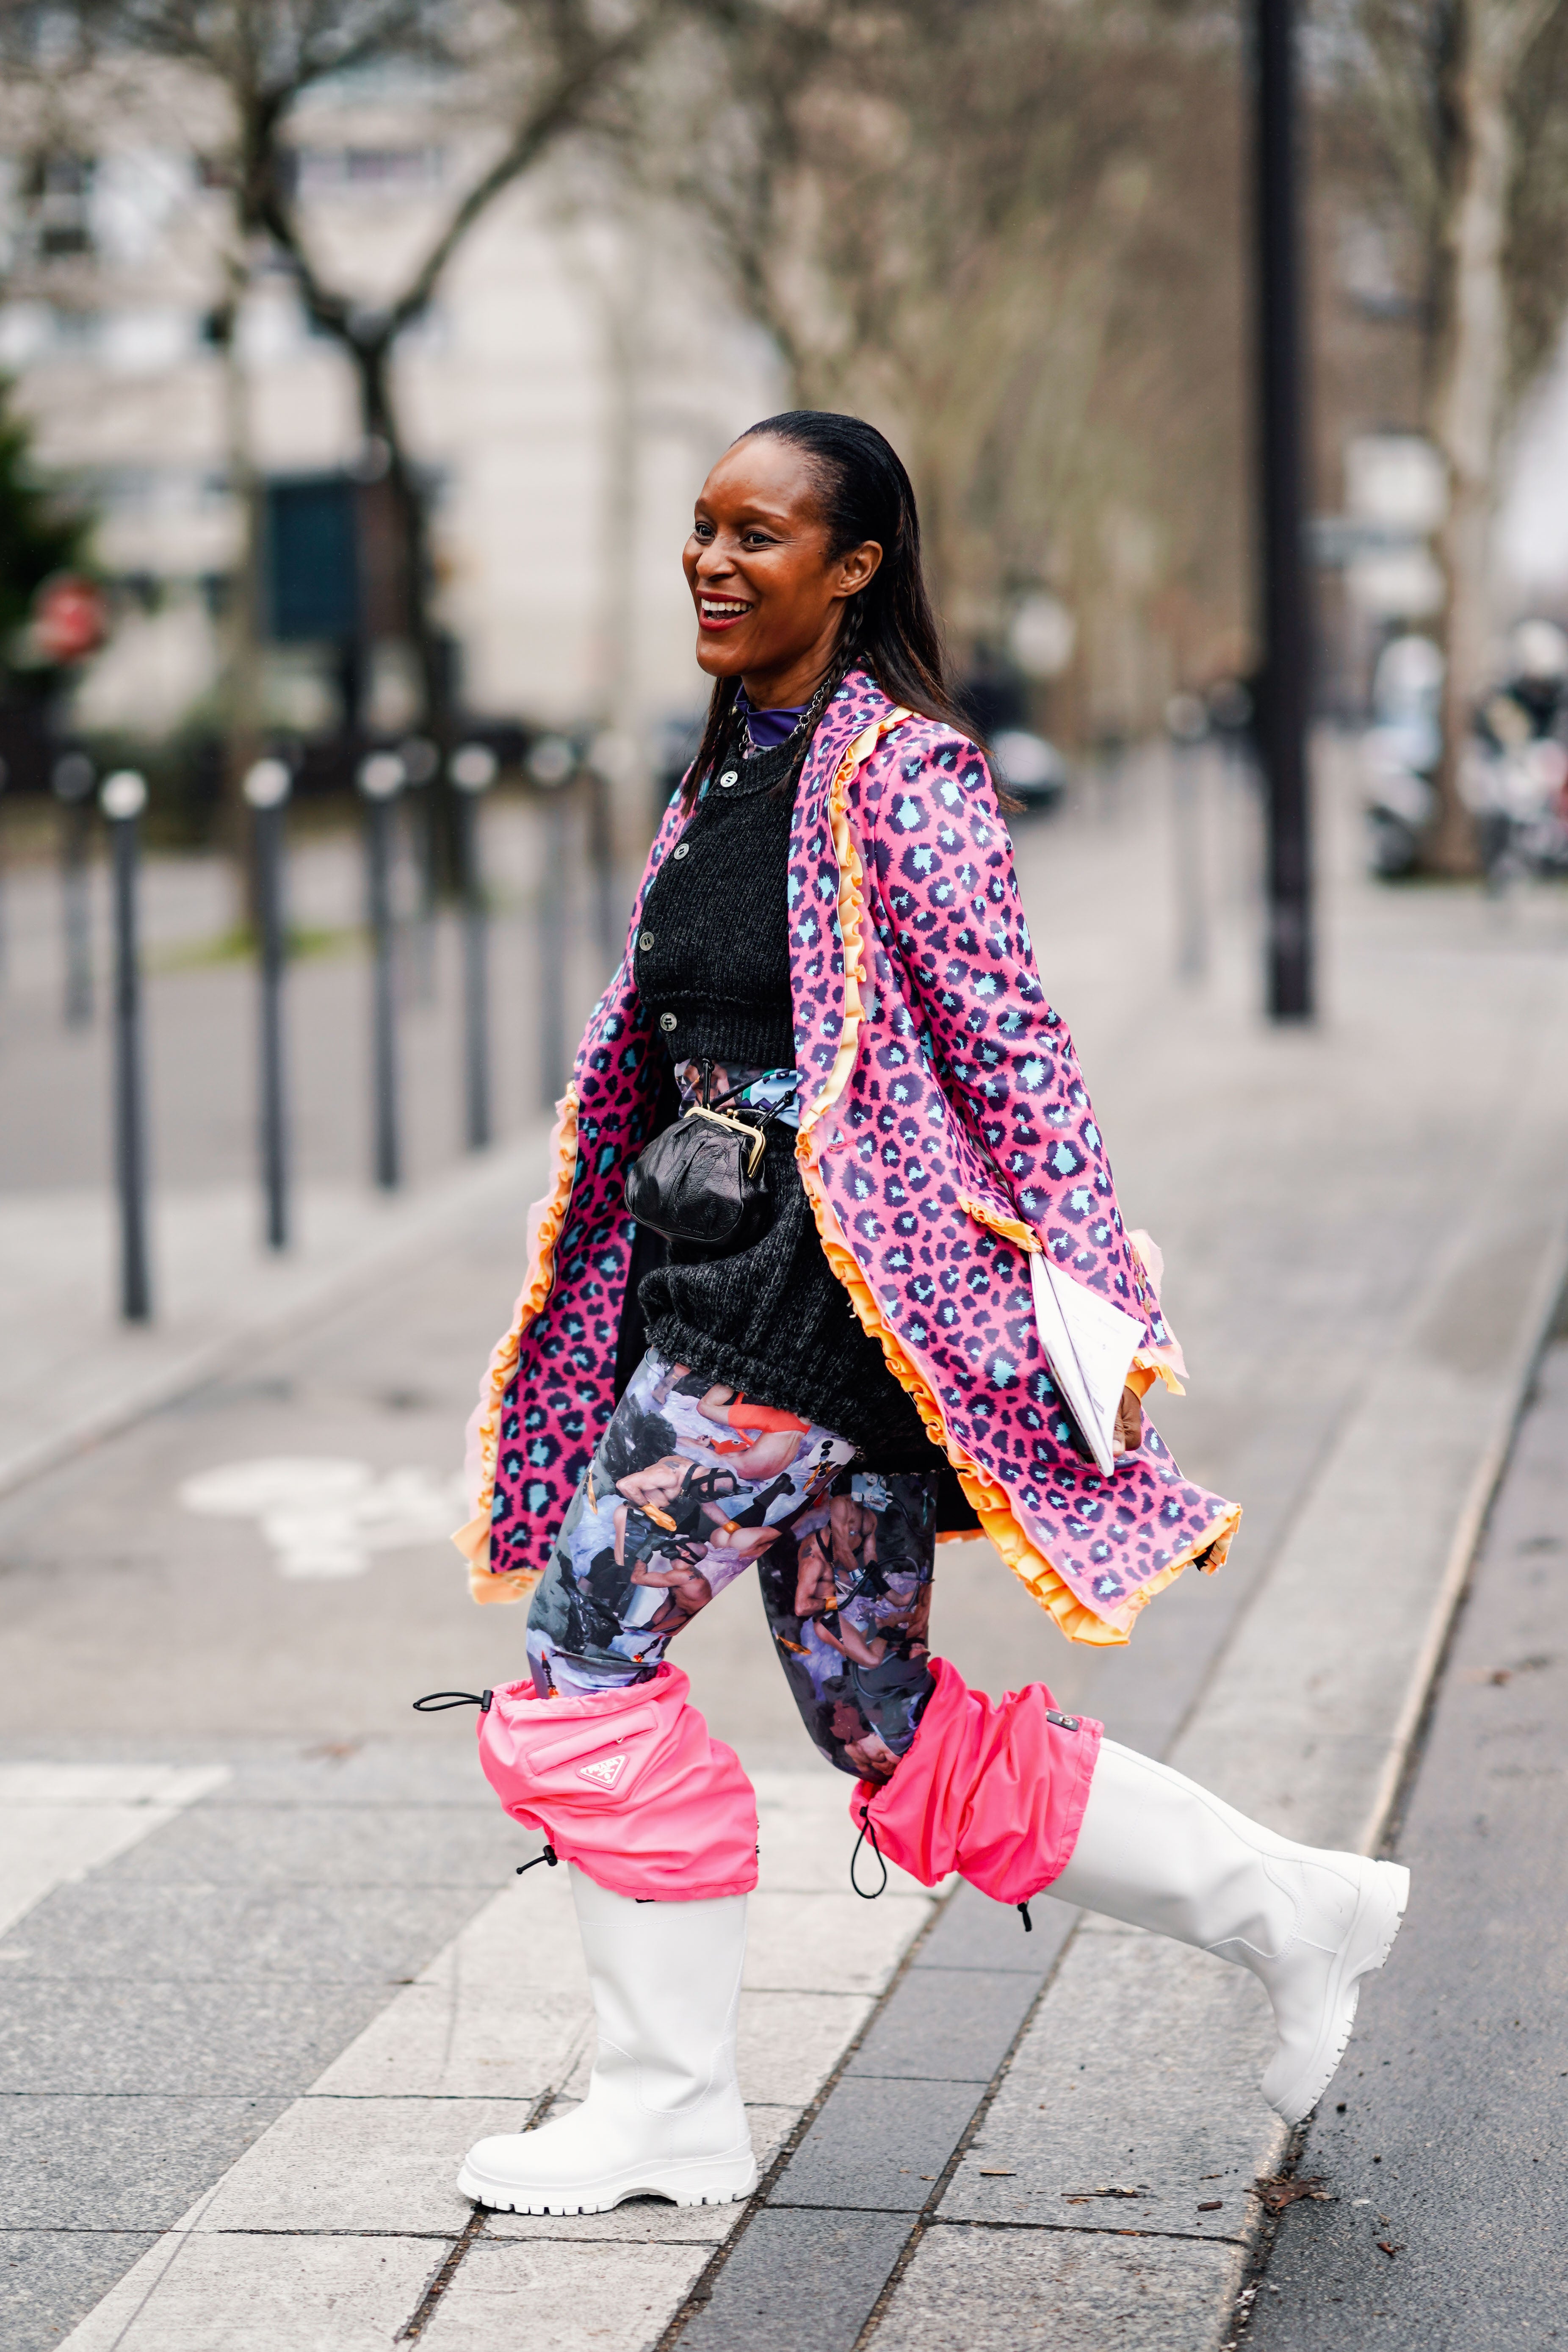 The Best Street Style Looks From Europe, With Love | Essence